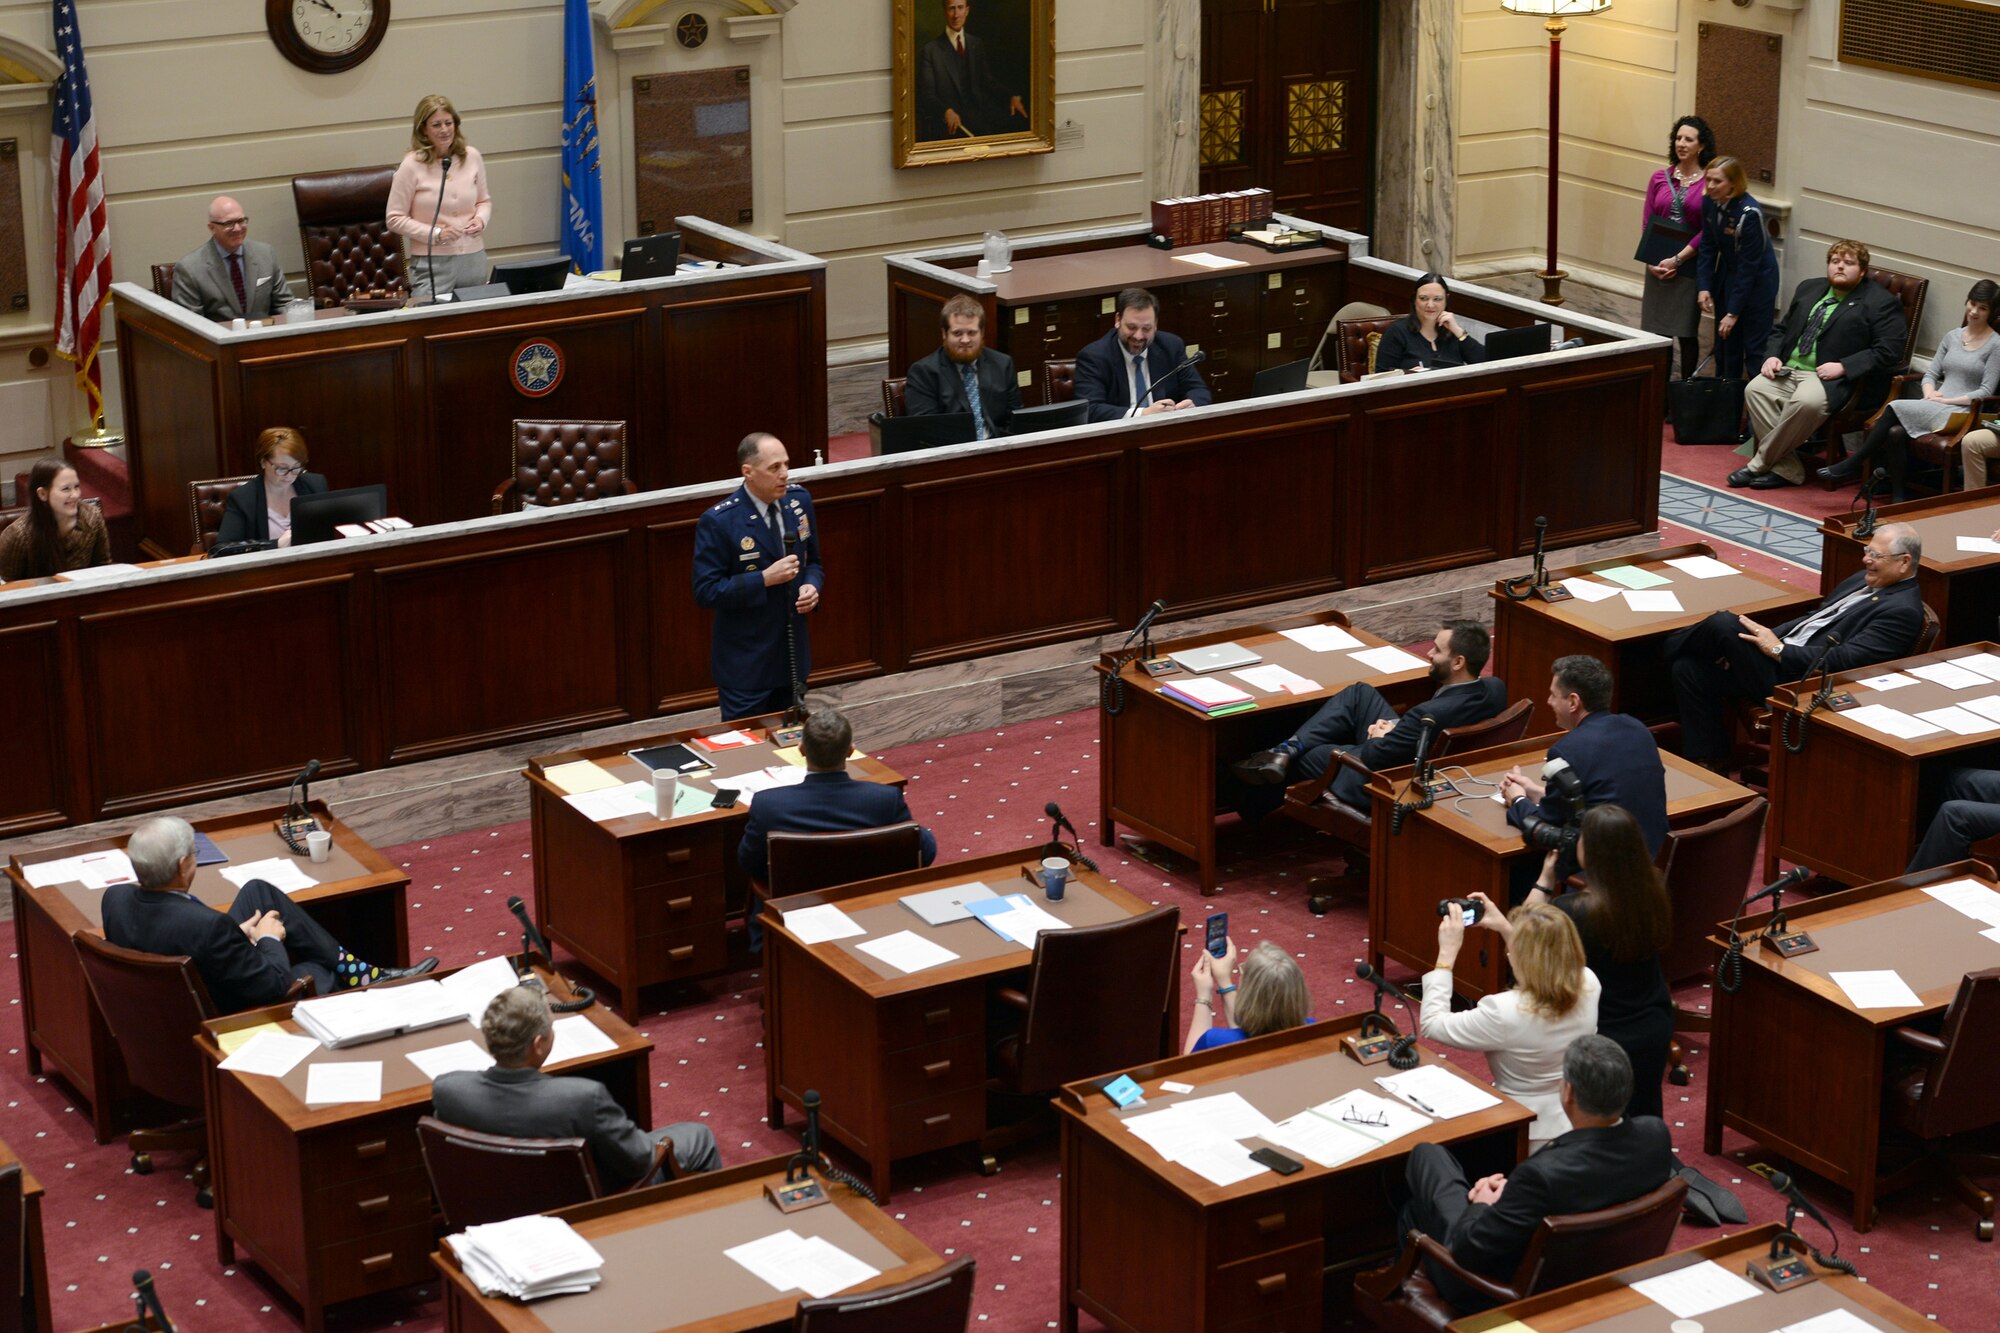 Lt. Gen. Lee K. Levy II, Air Force Sustainment Center Commander, addresses the Oklahoma State Senate March 30 at the capitol. He was at the capitol to accept proclamations honoring Tinker’s 75 years of supporting the warfighter. The general talked about the importance of education and science, technology, engineering and mathematics, stressing the vital role it plays in the nation’s security and national competitiveness. (Air Force photo by Kelly White)